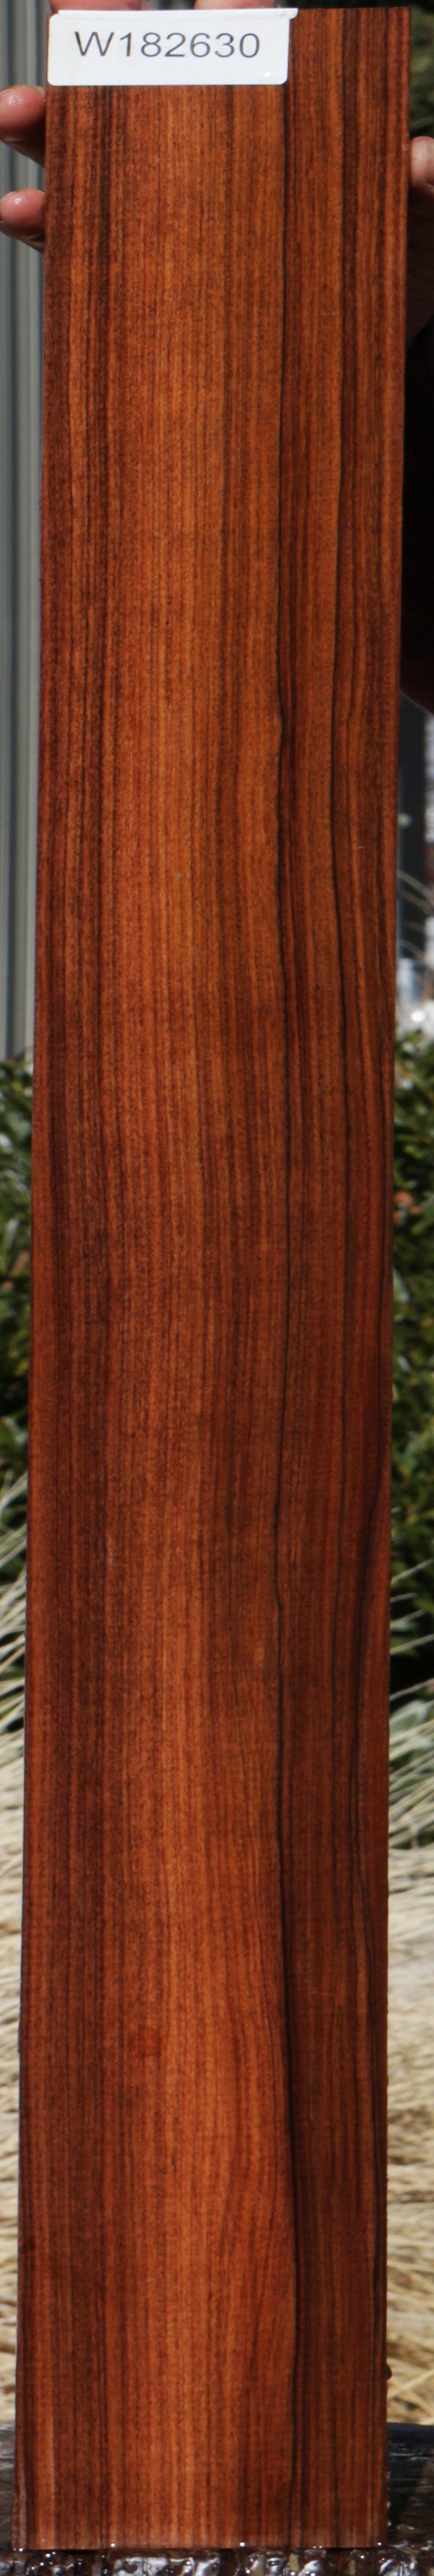 Quilted Bolivian Rosewood Lumber